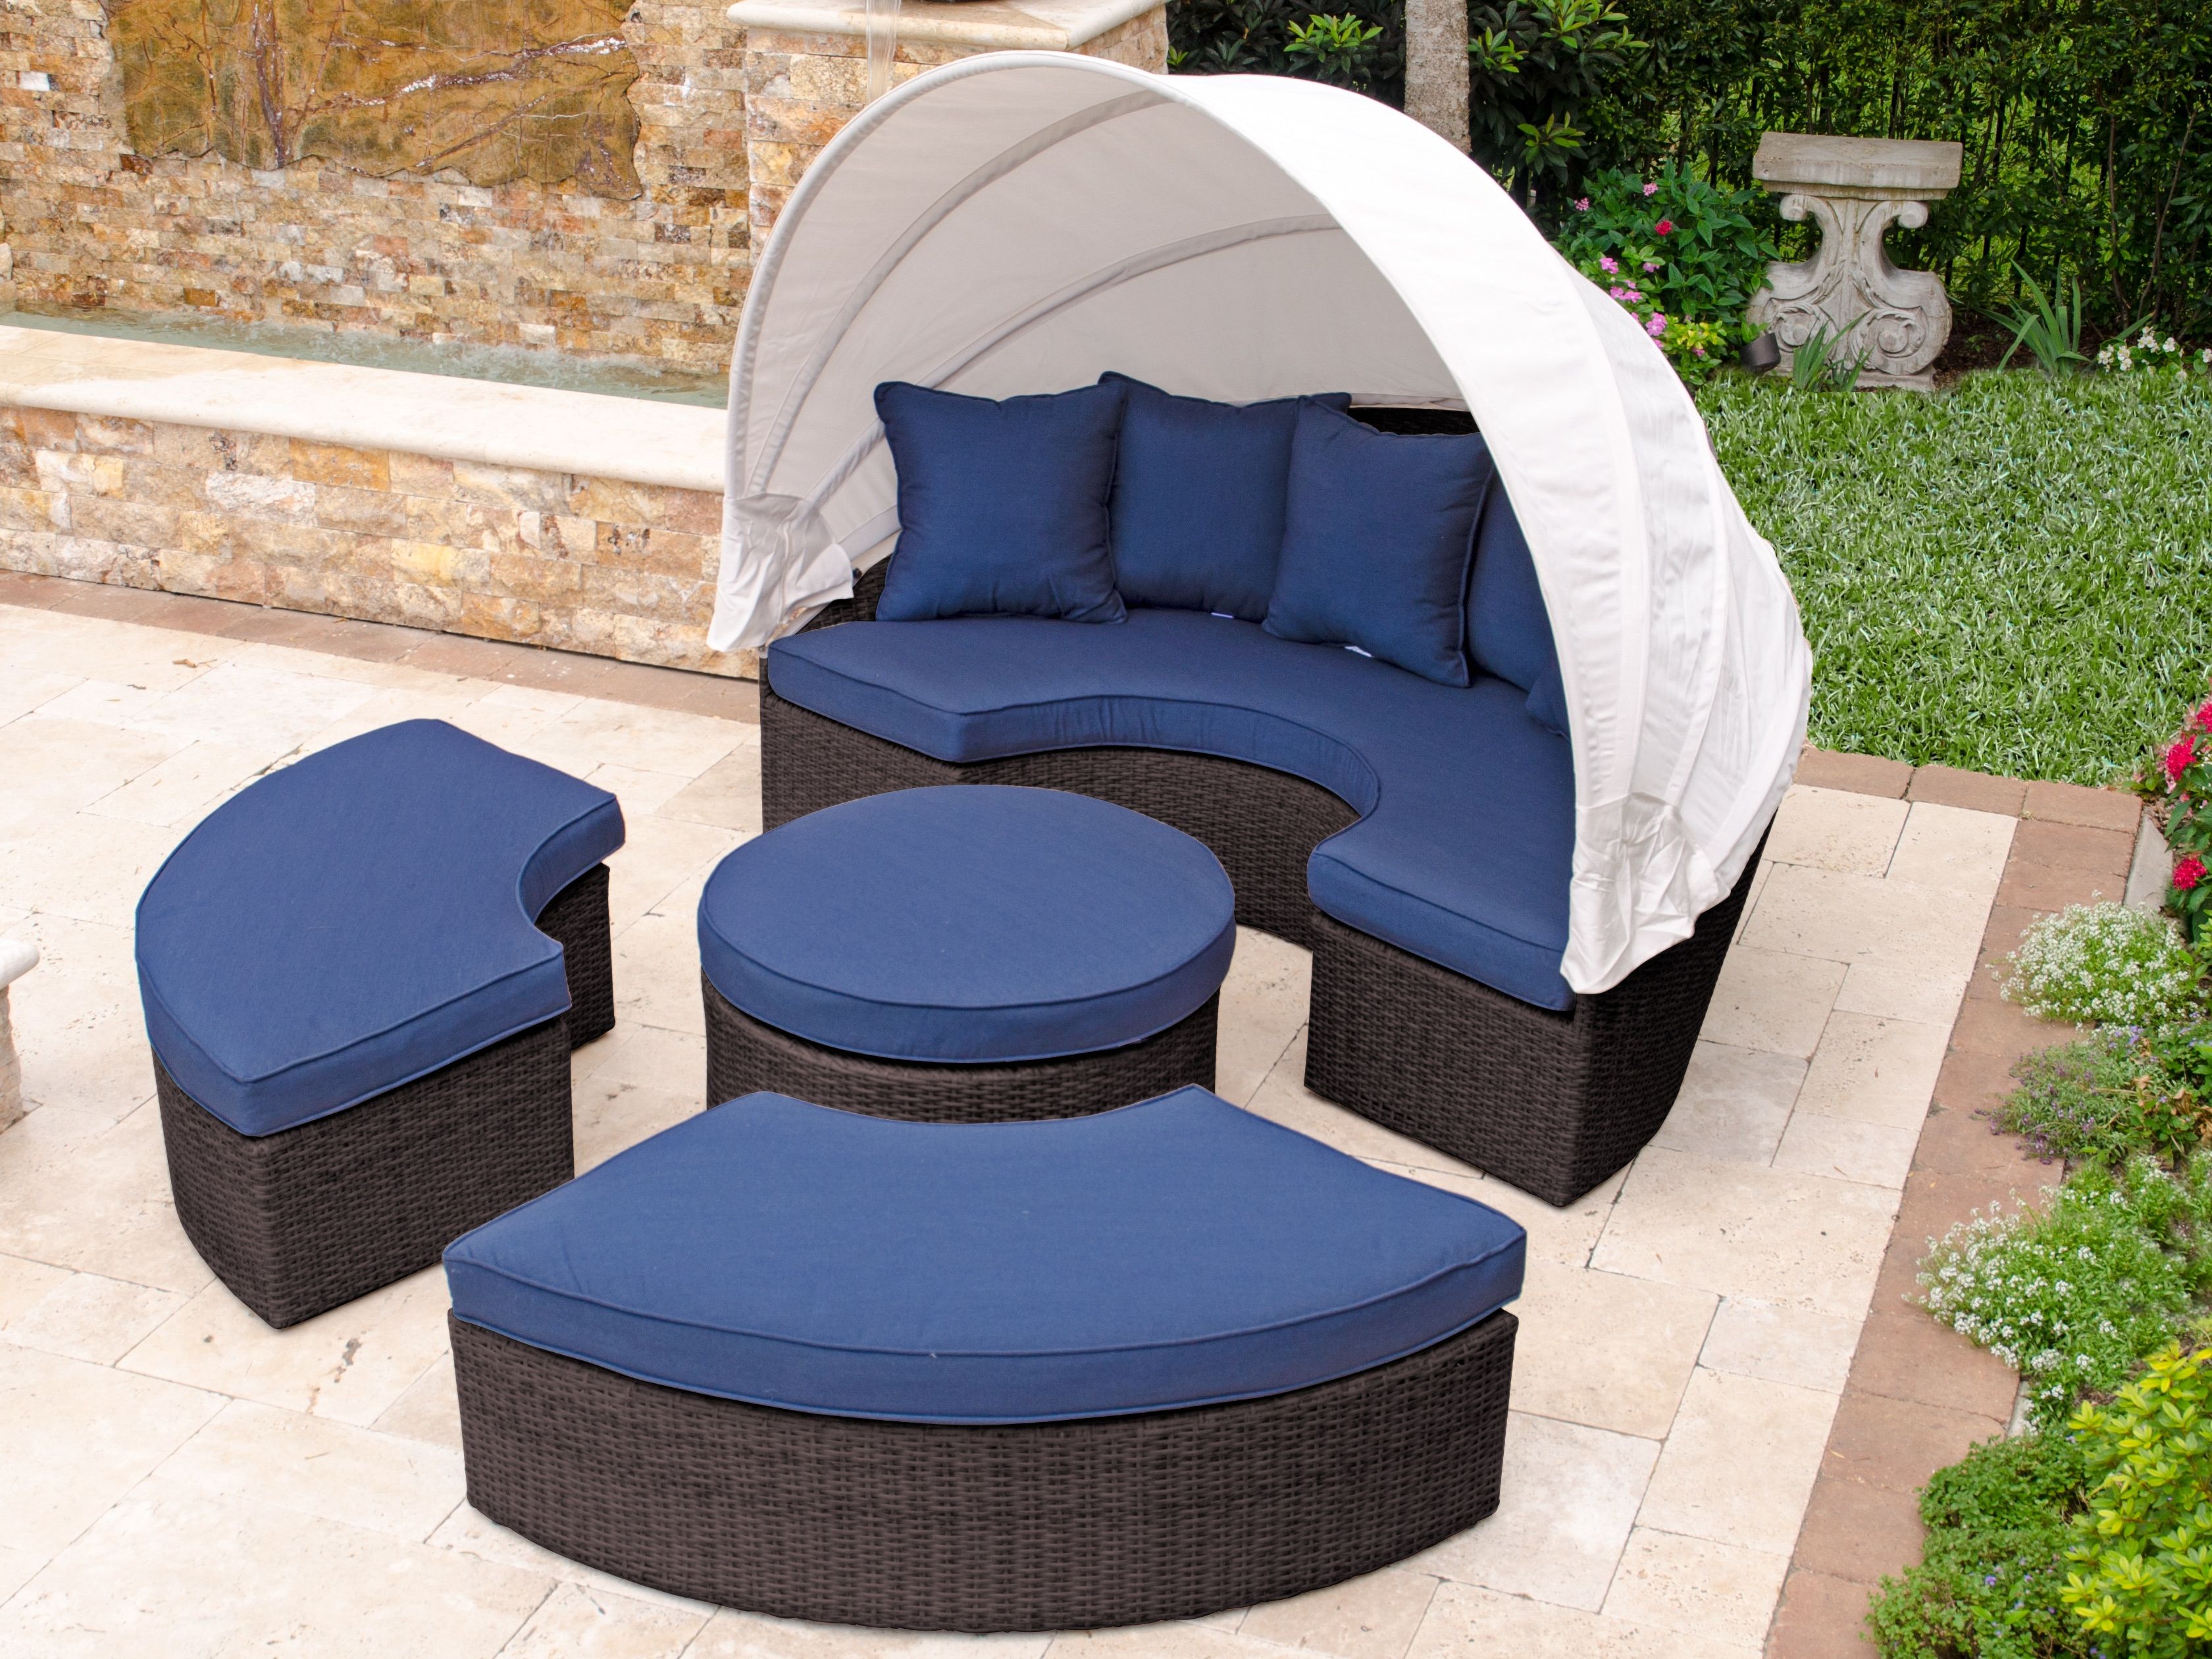 Current Behling Canopy Patio Daybeds With Cushions Pertaining To Furniture: Cool Patio Daybed With Alluring Cushions For (View 11 of 25)